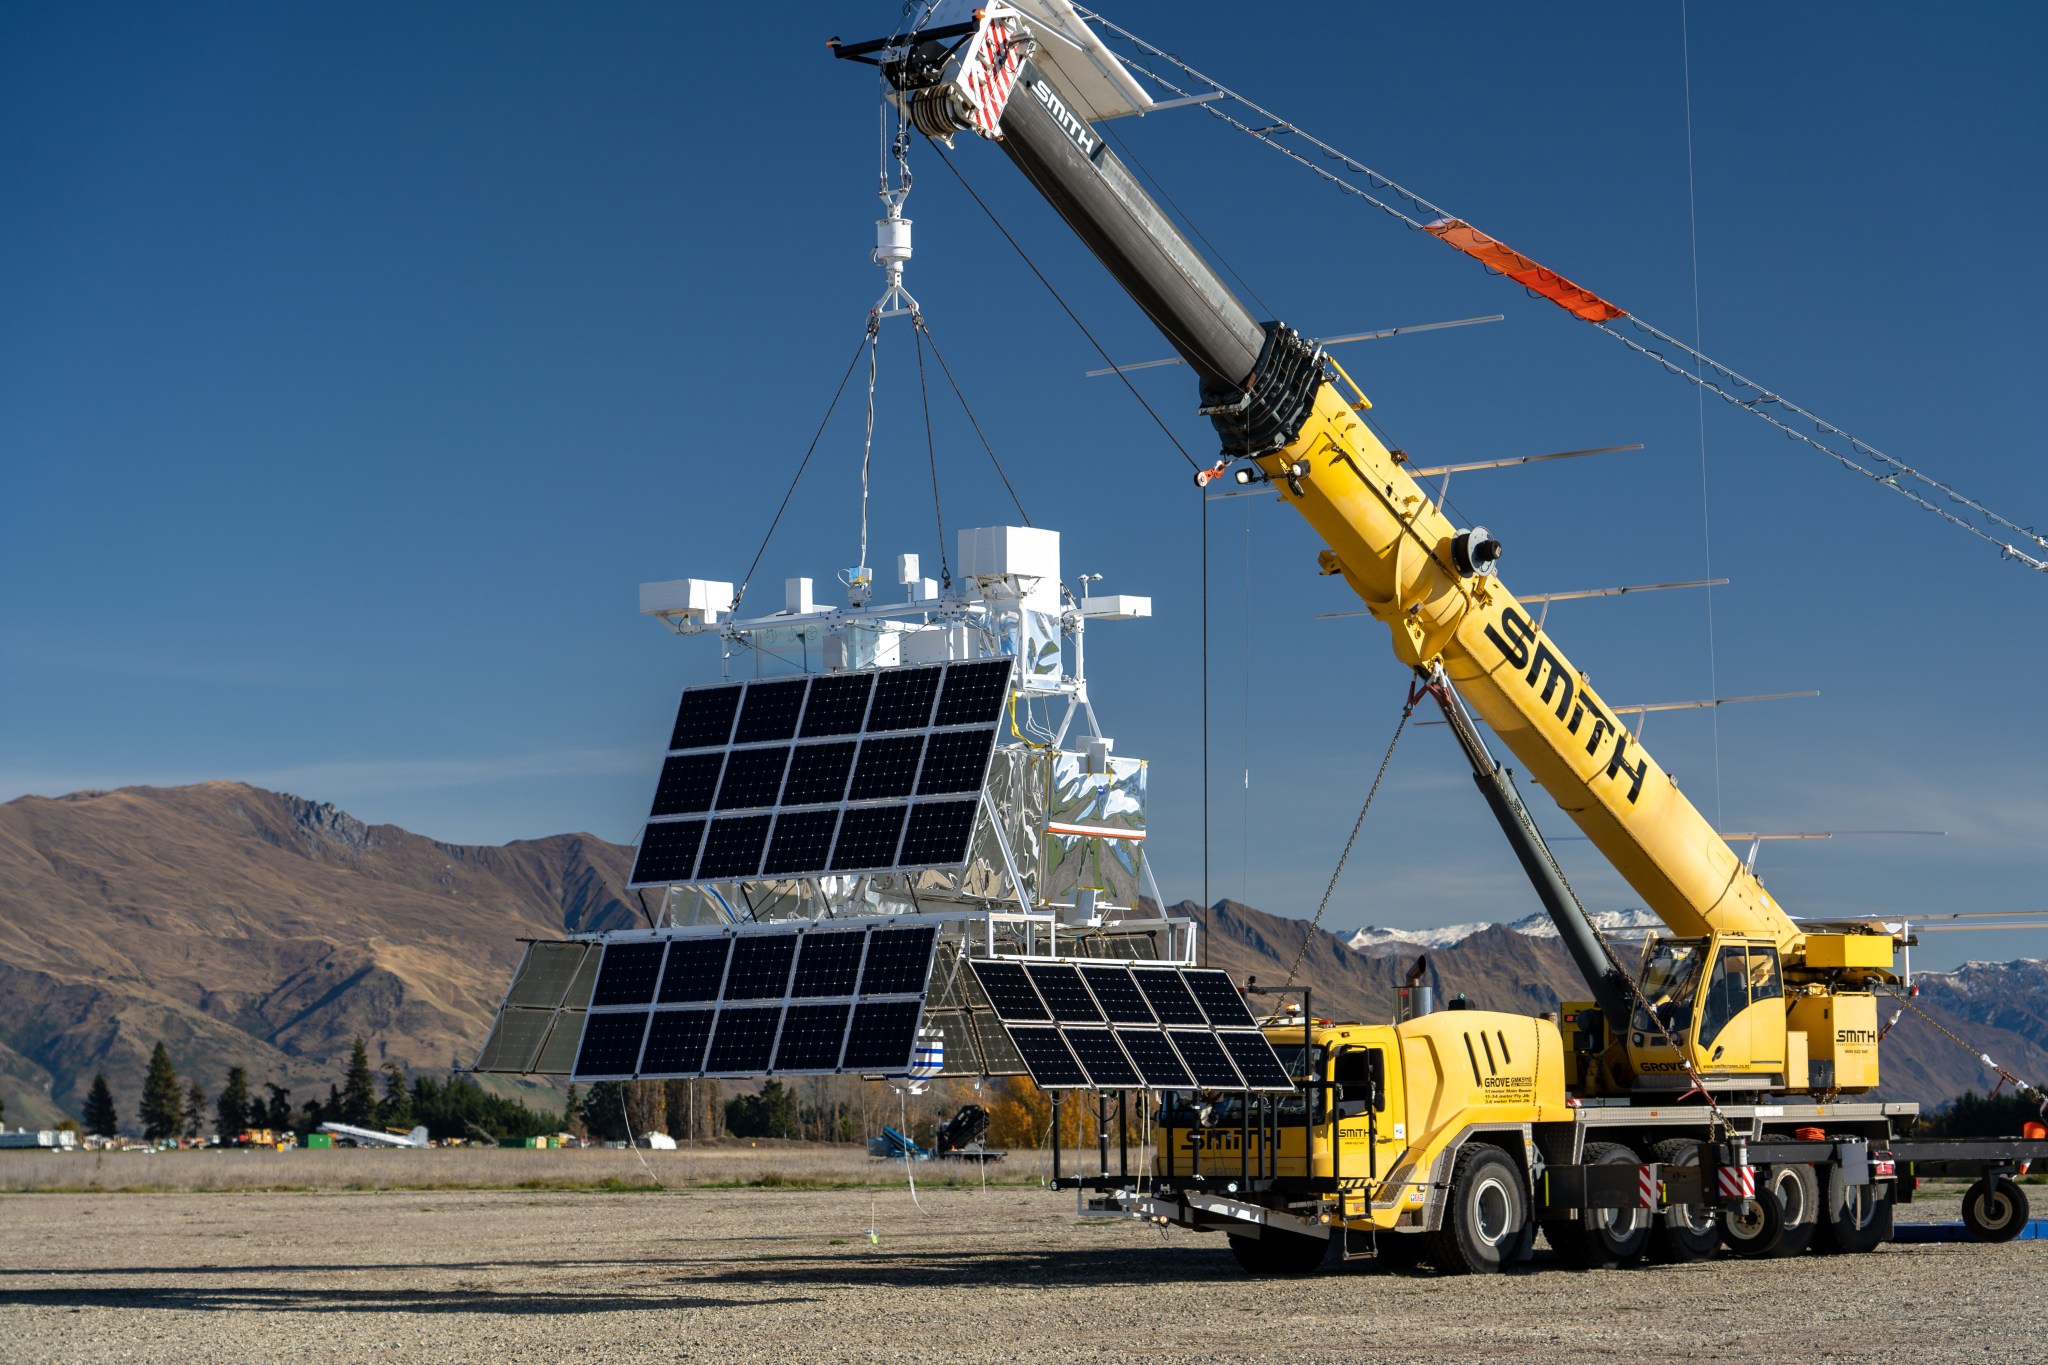 The EUSO-2 payload hangs from a yellow crane vehicle. The payload main body is mostly enclosed silver plastic wrapped wraps with multiple bars across the top with various instrumentation.